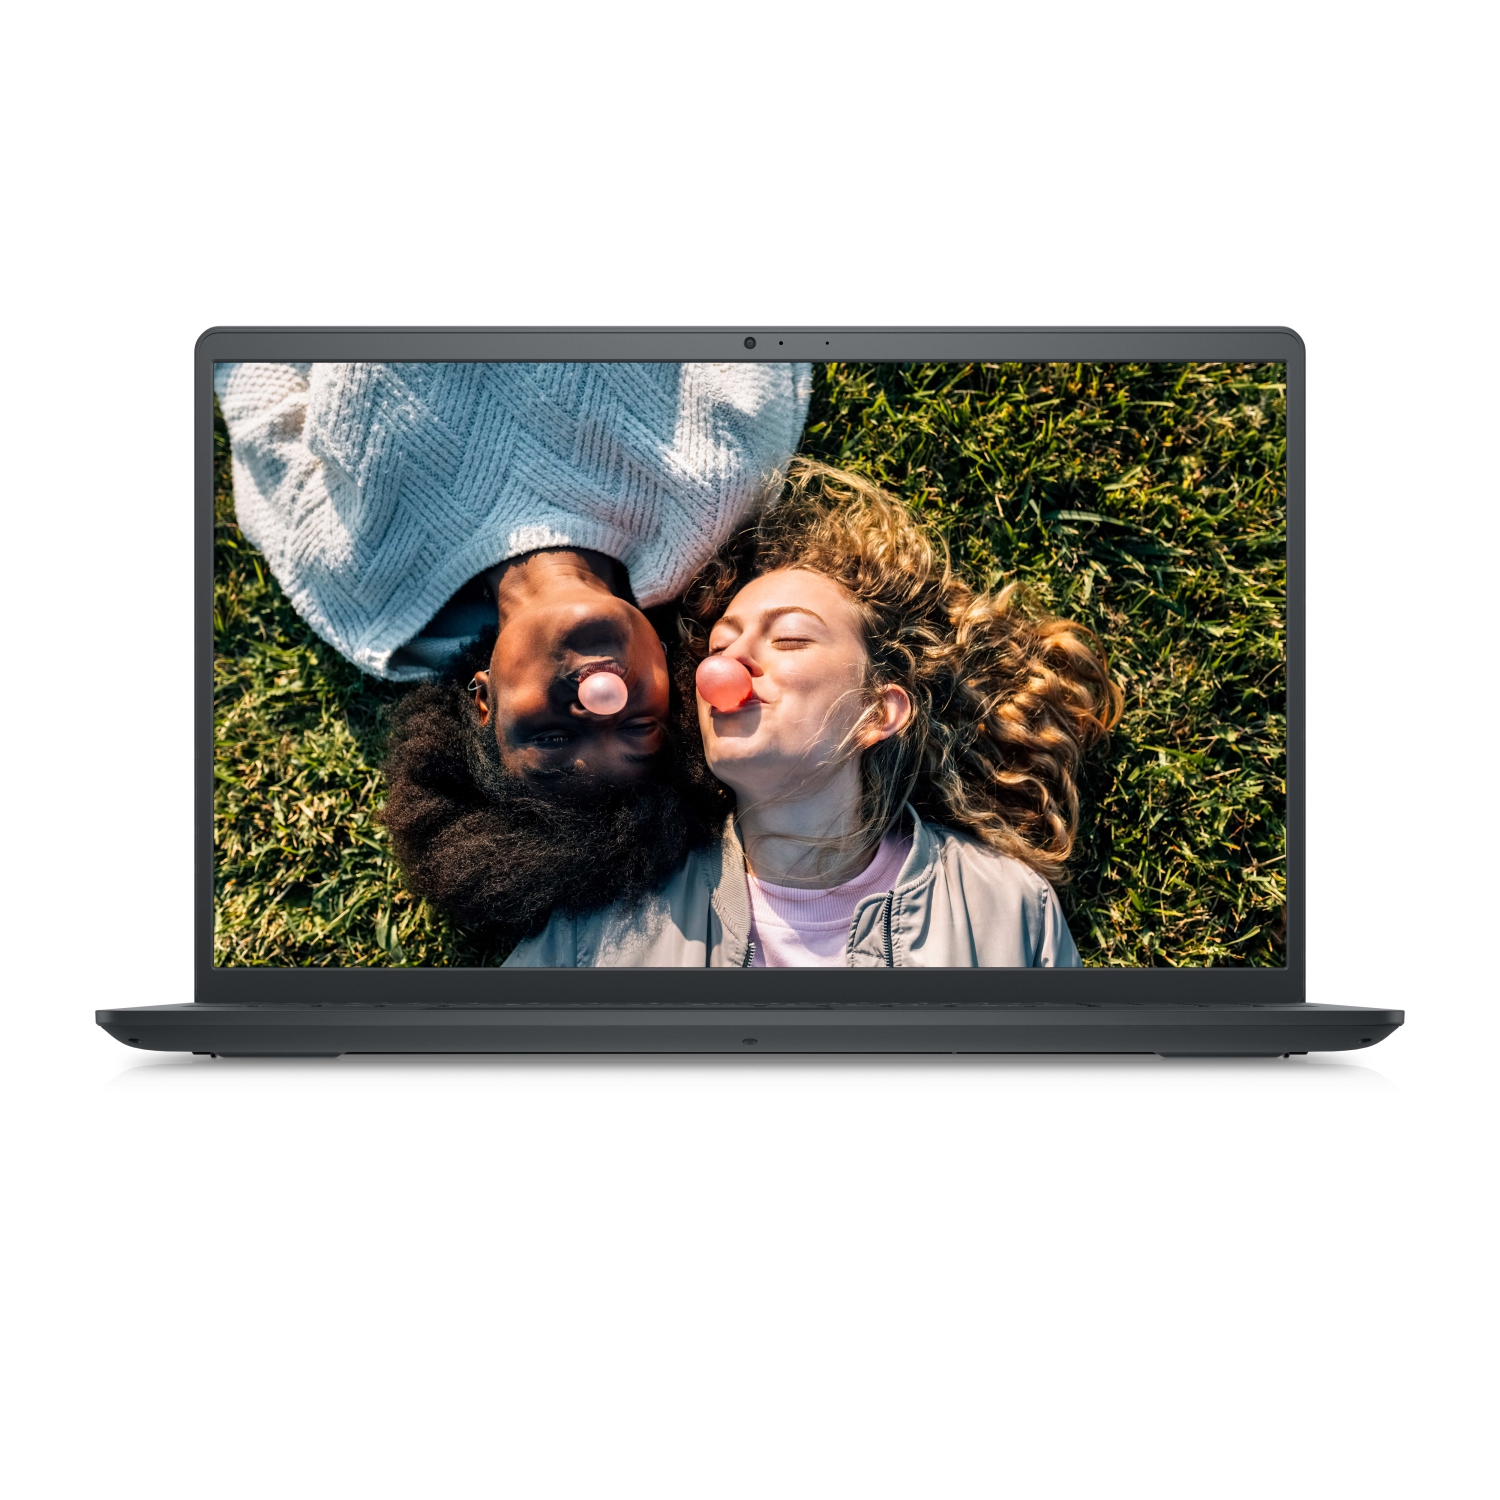 Refurbished (Excellent) – Dell Inspiron 3511 Laptop (2021) | 15.6" FHD | Core i5 - 512GB SSD - 12GB RAM | 4 Cores @ 4.2 GHz - 11th Gen CPU